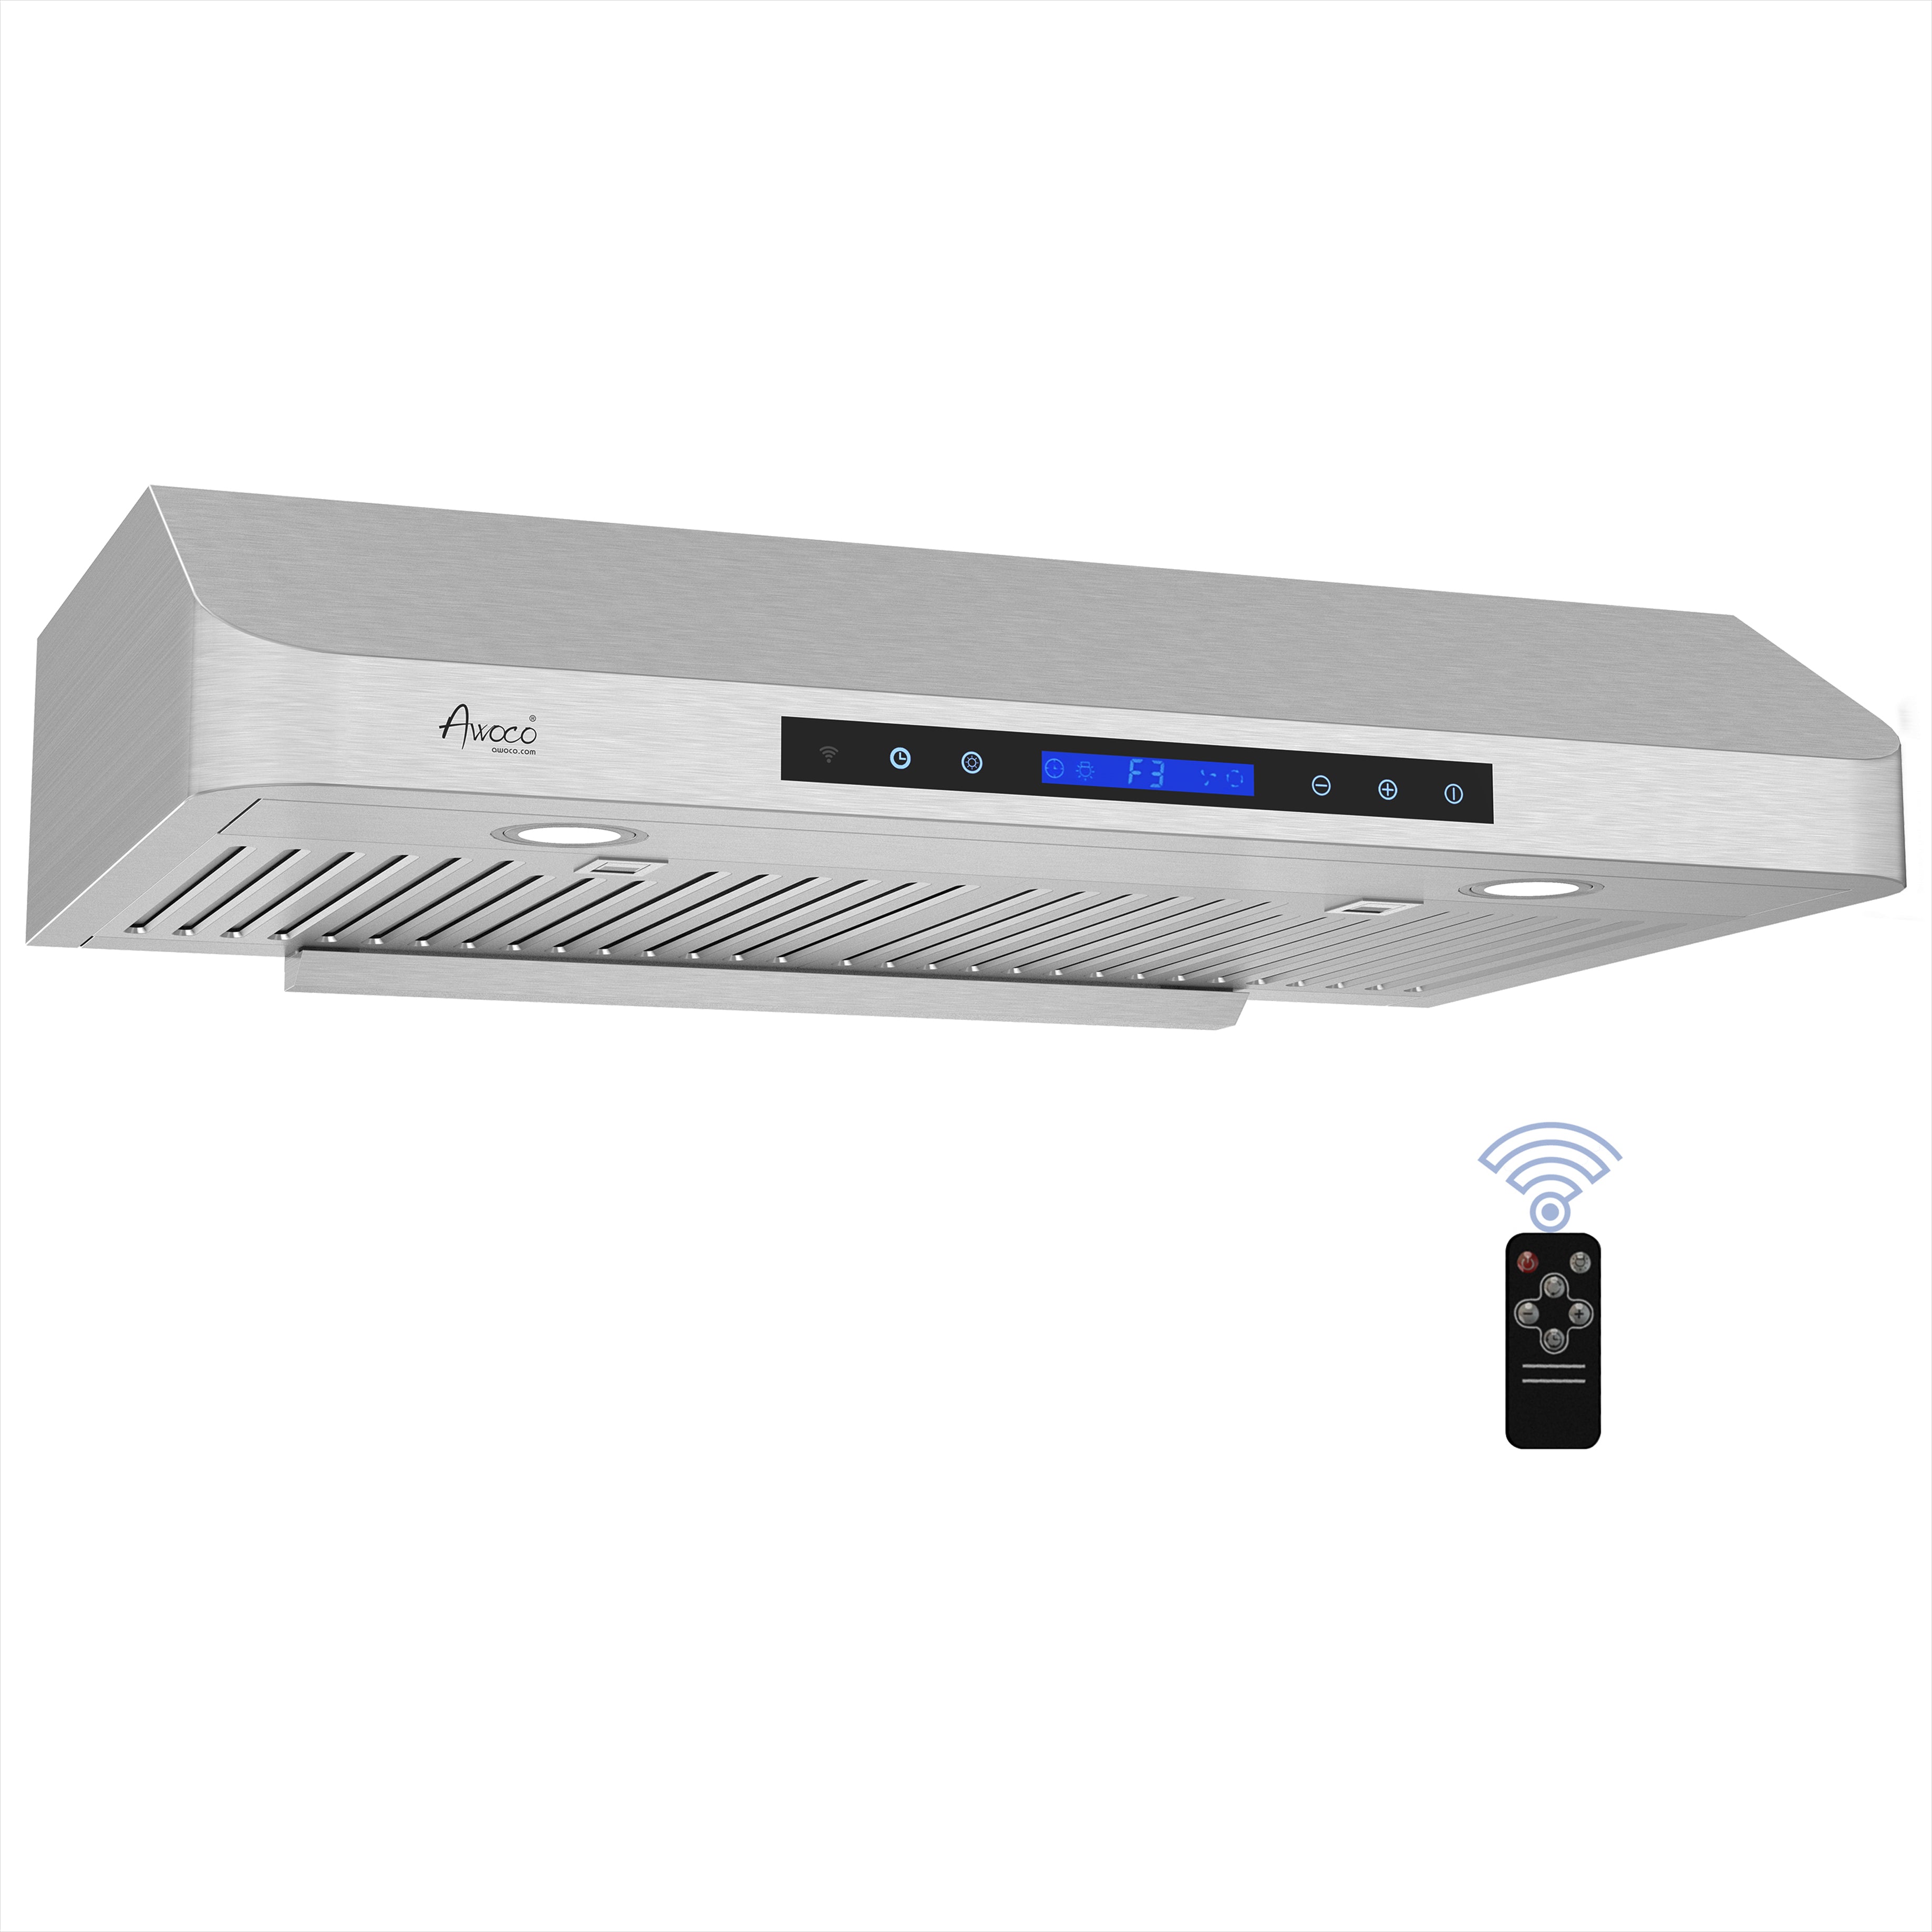 Awoco 29.8 900 CFM Ducted Under Cabinet Range Hood in Stainless Steel with Remote Control Included RH-C06-A30